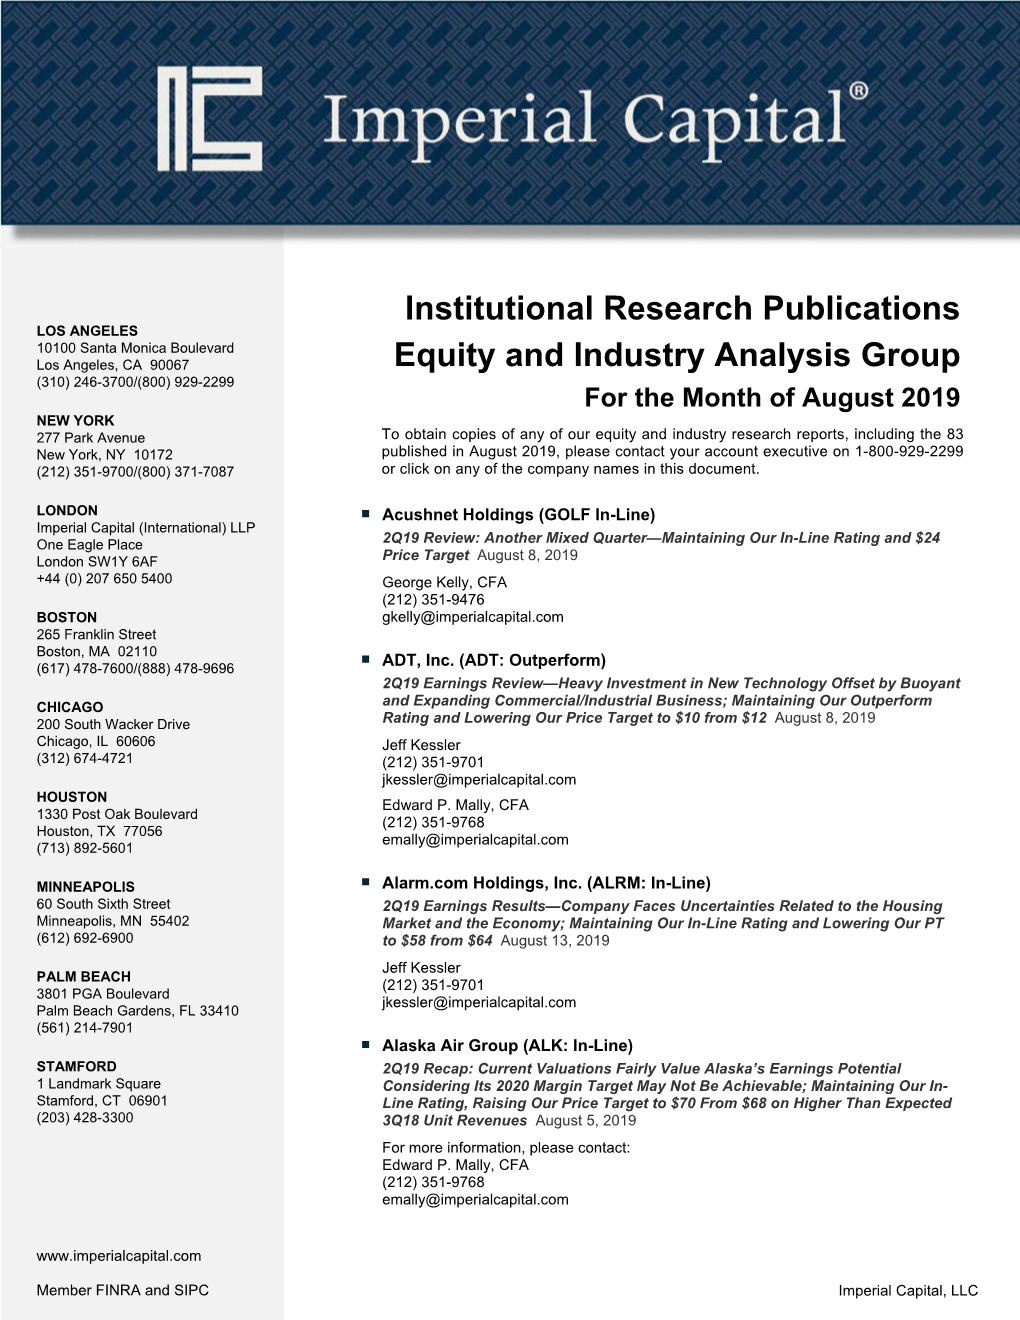 Institutional Research Publications Equity and Industry Analysis Group